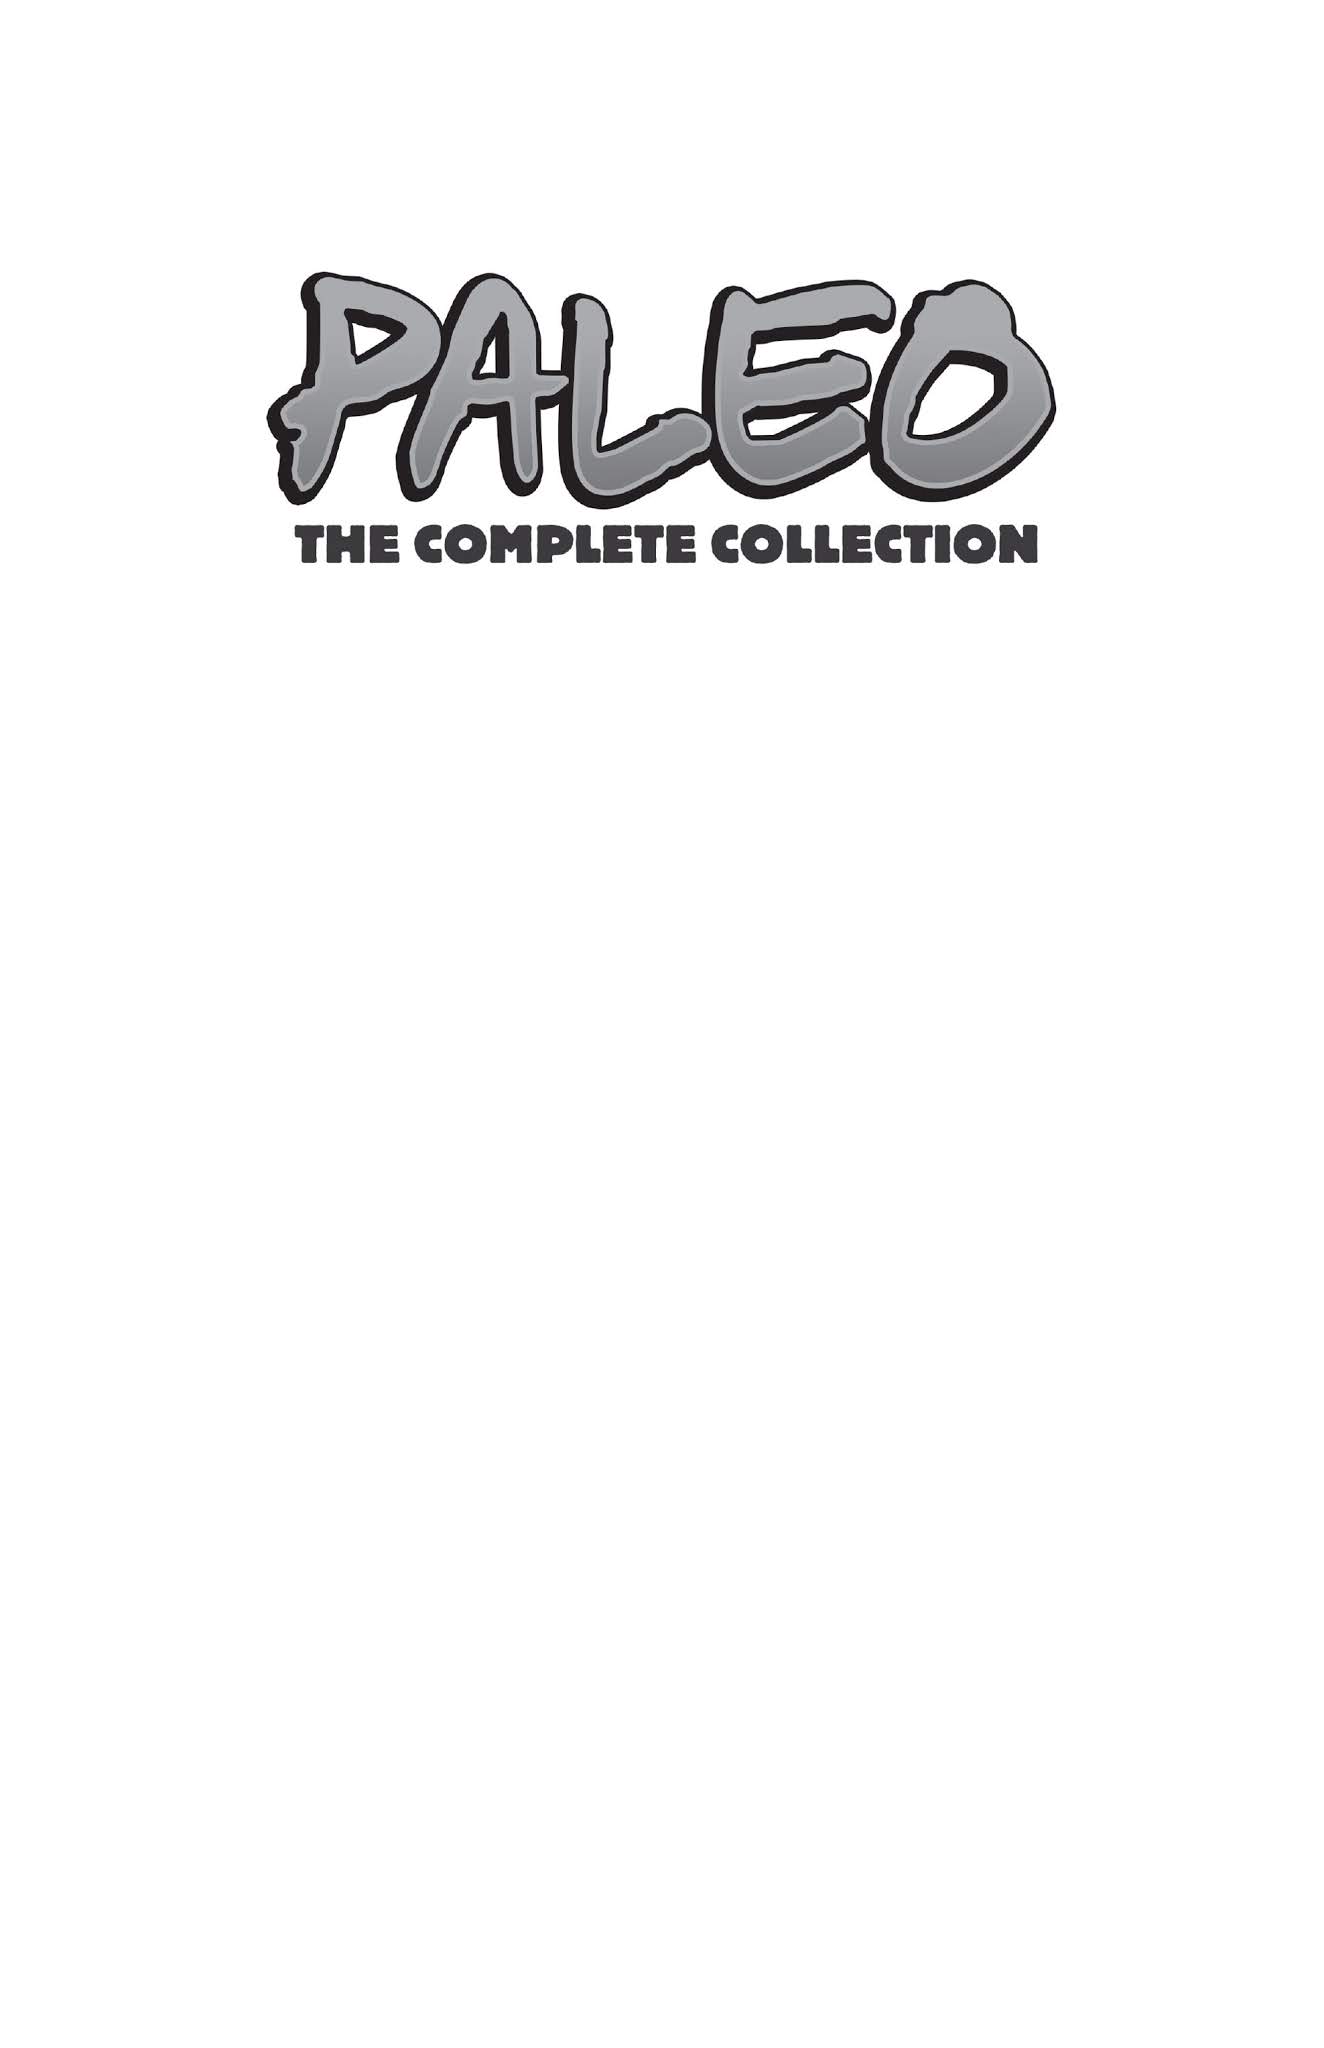 Read online Paleo: Tales of the late Cretaceous comic -  Issue # TPB (Part 1) - 2